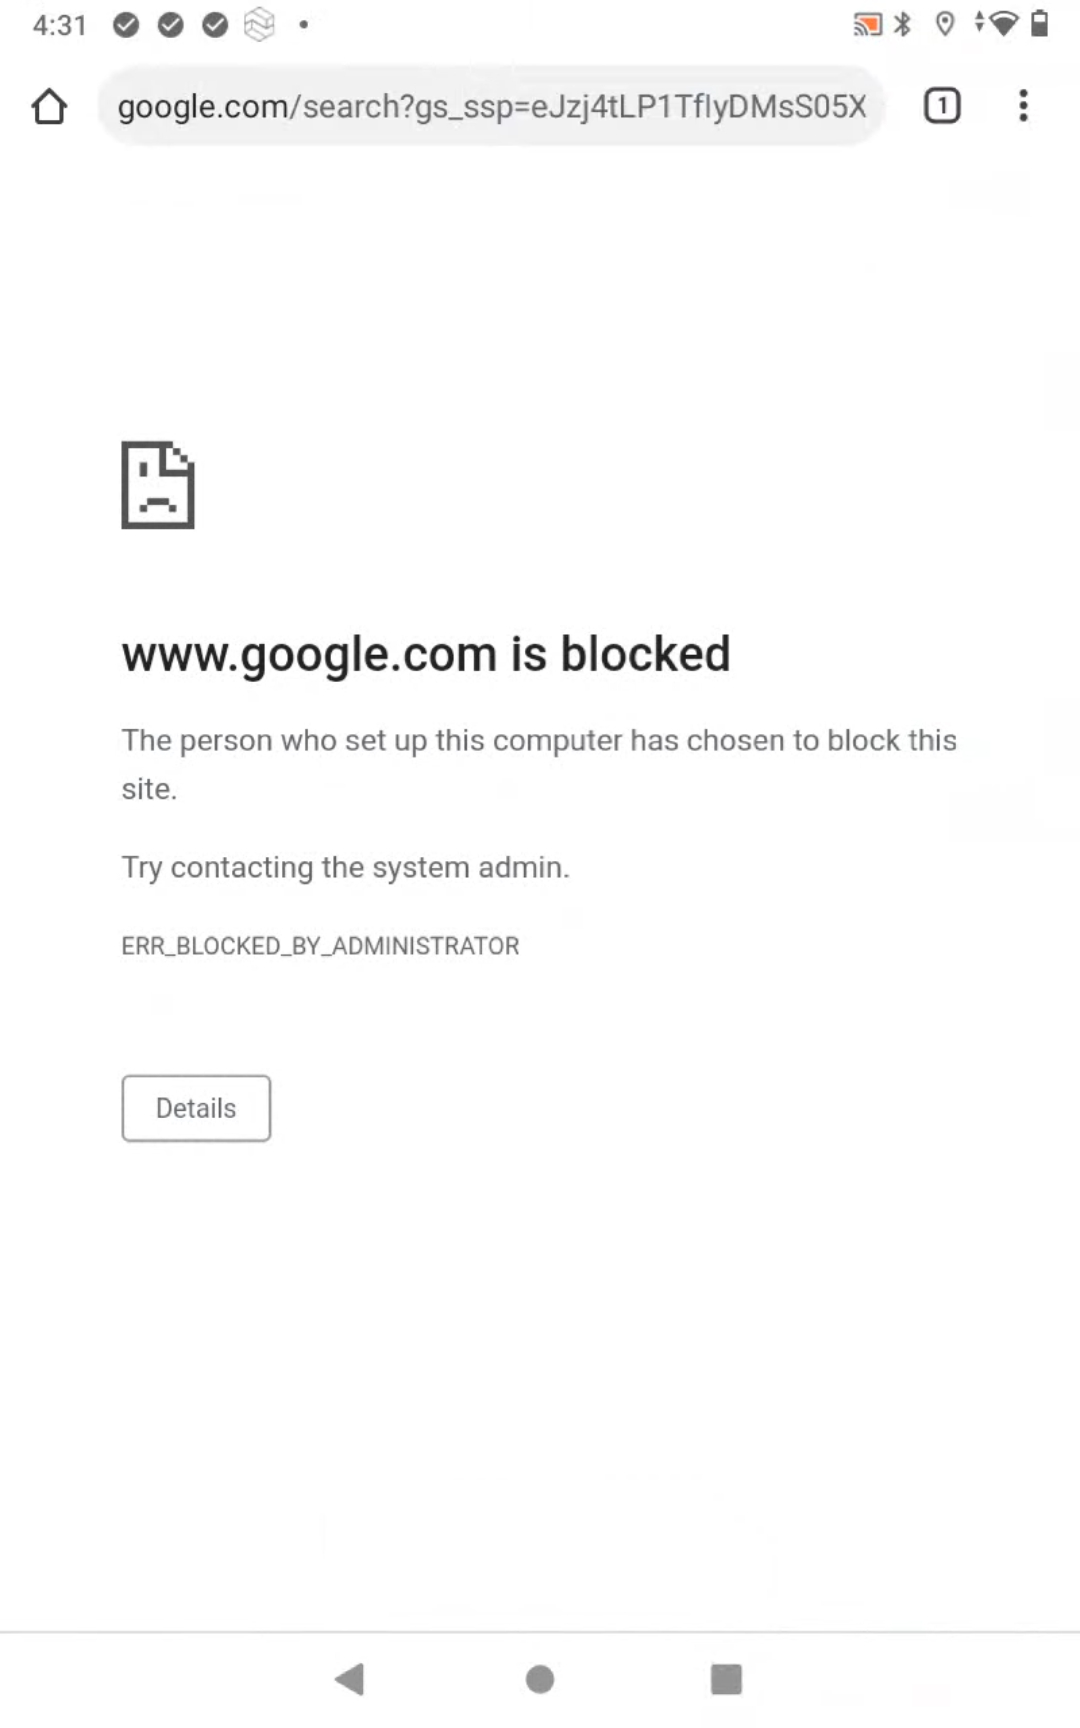 Example_of_google.com_being_blocked_on_a_device.jpg